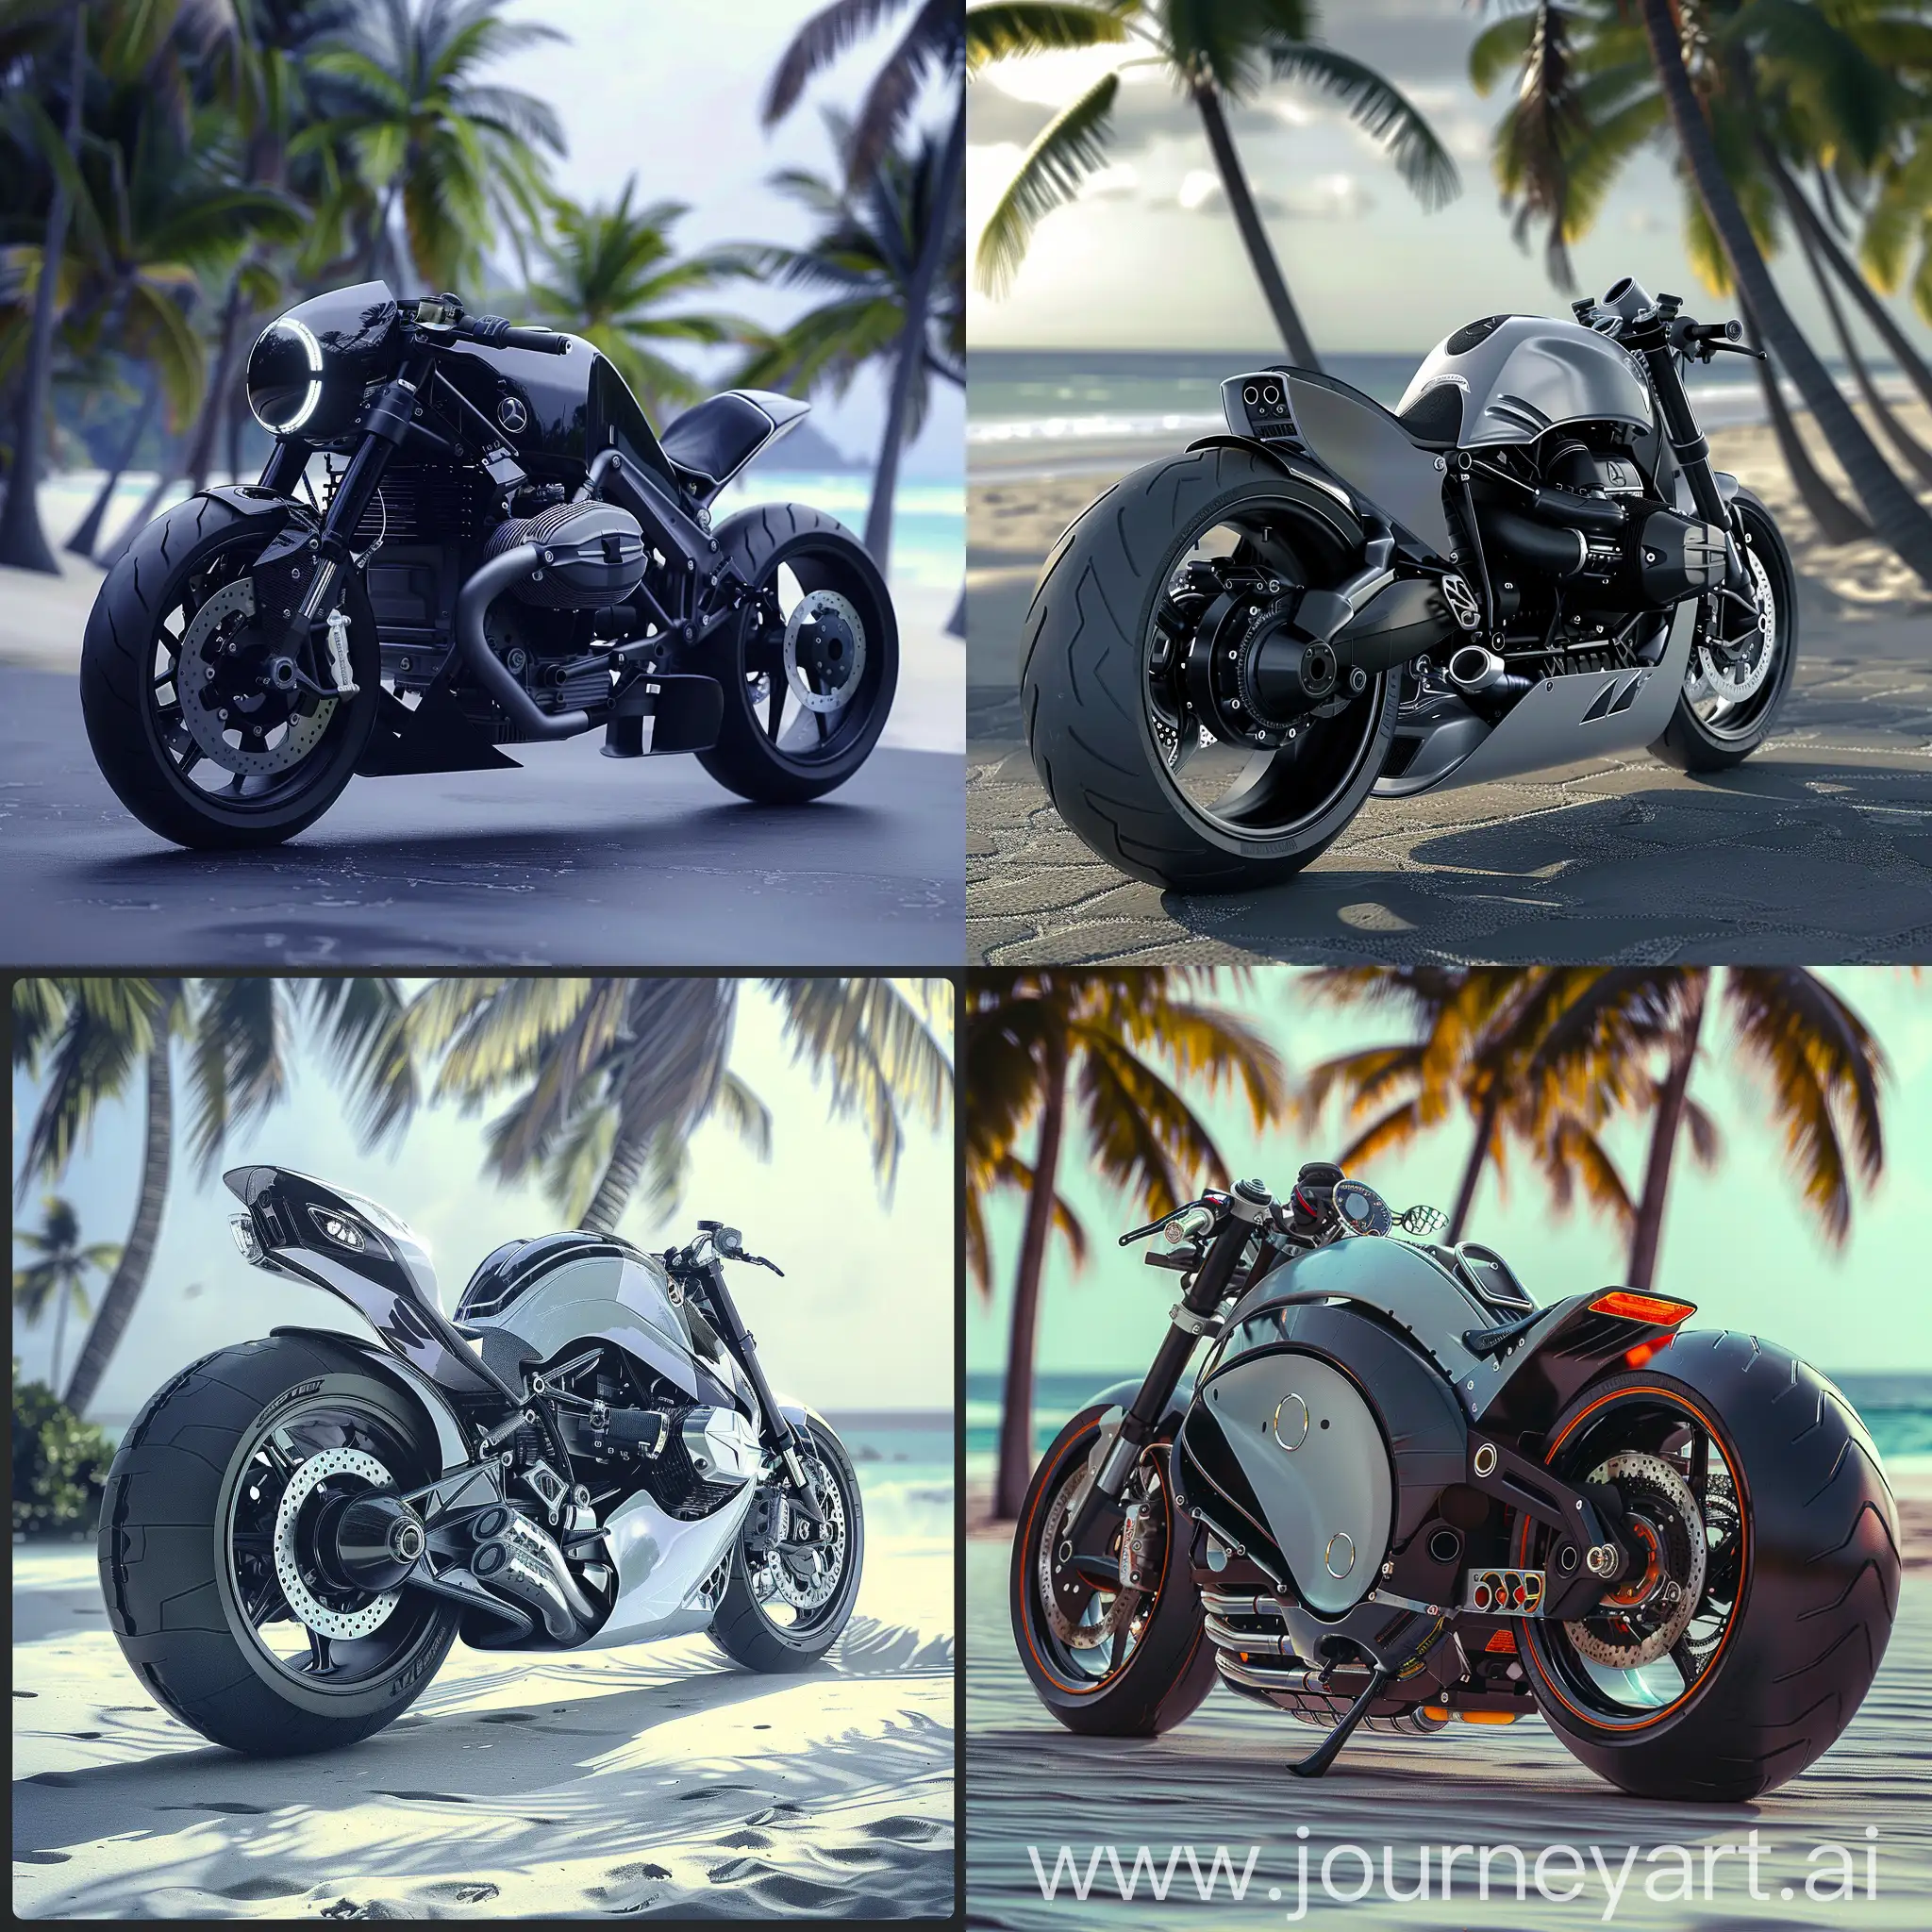 MercedesBenz-Ultra-Sports-Motorcycle-with-Beach-and-Palm-Trees-Background